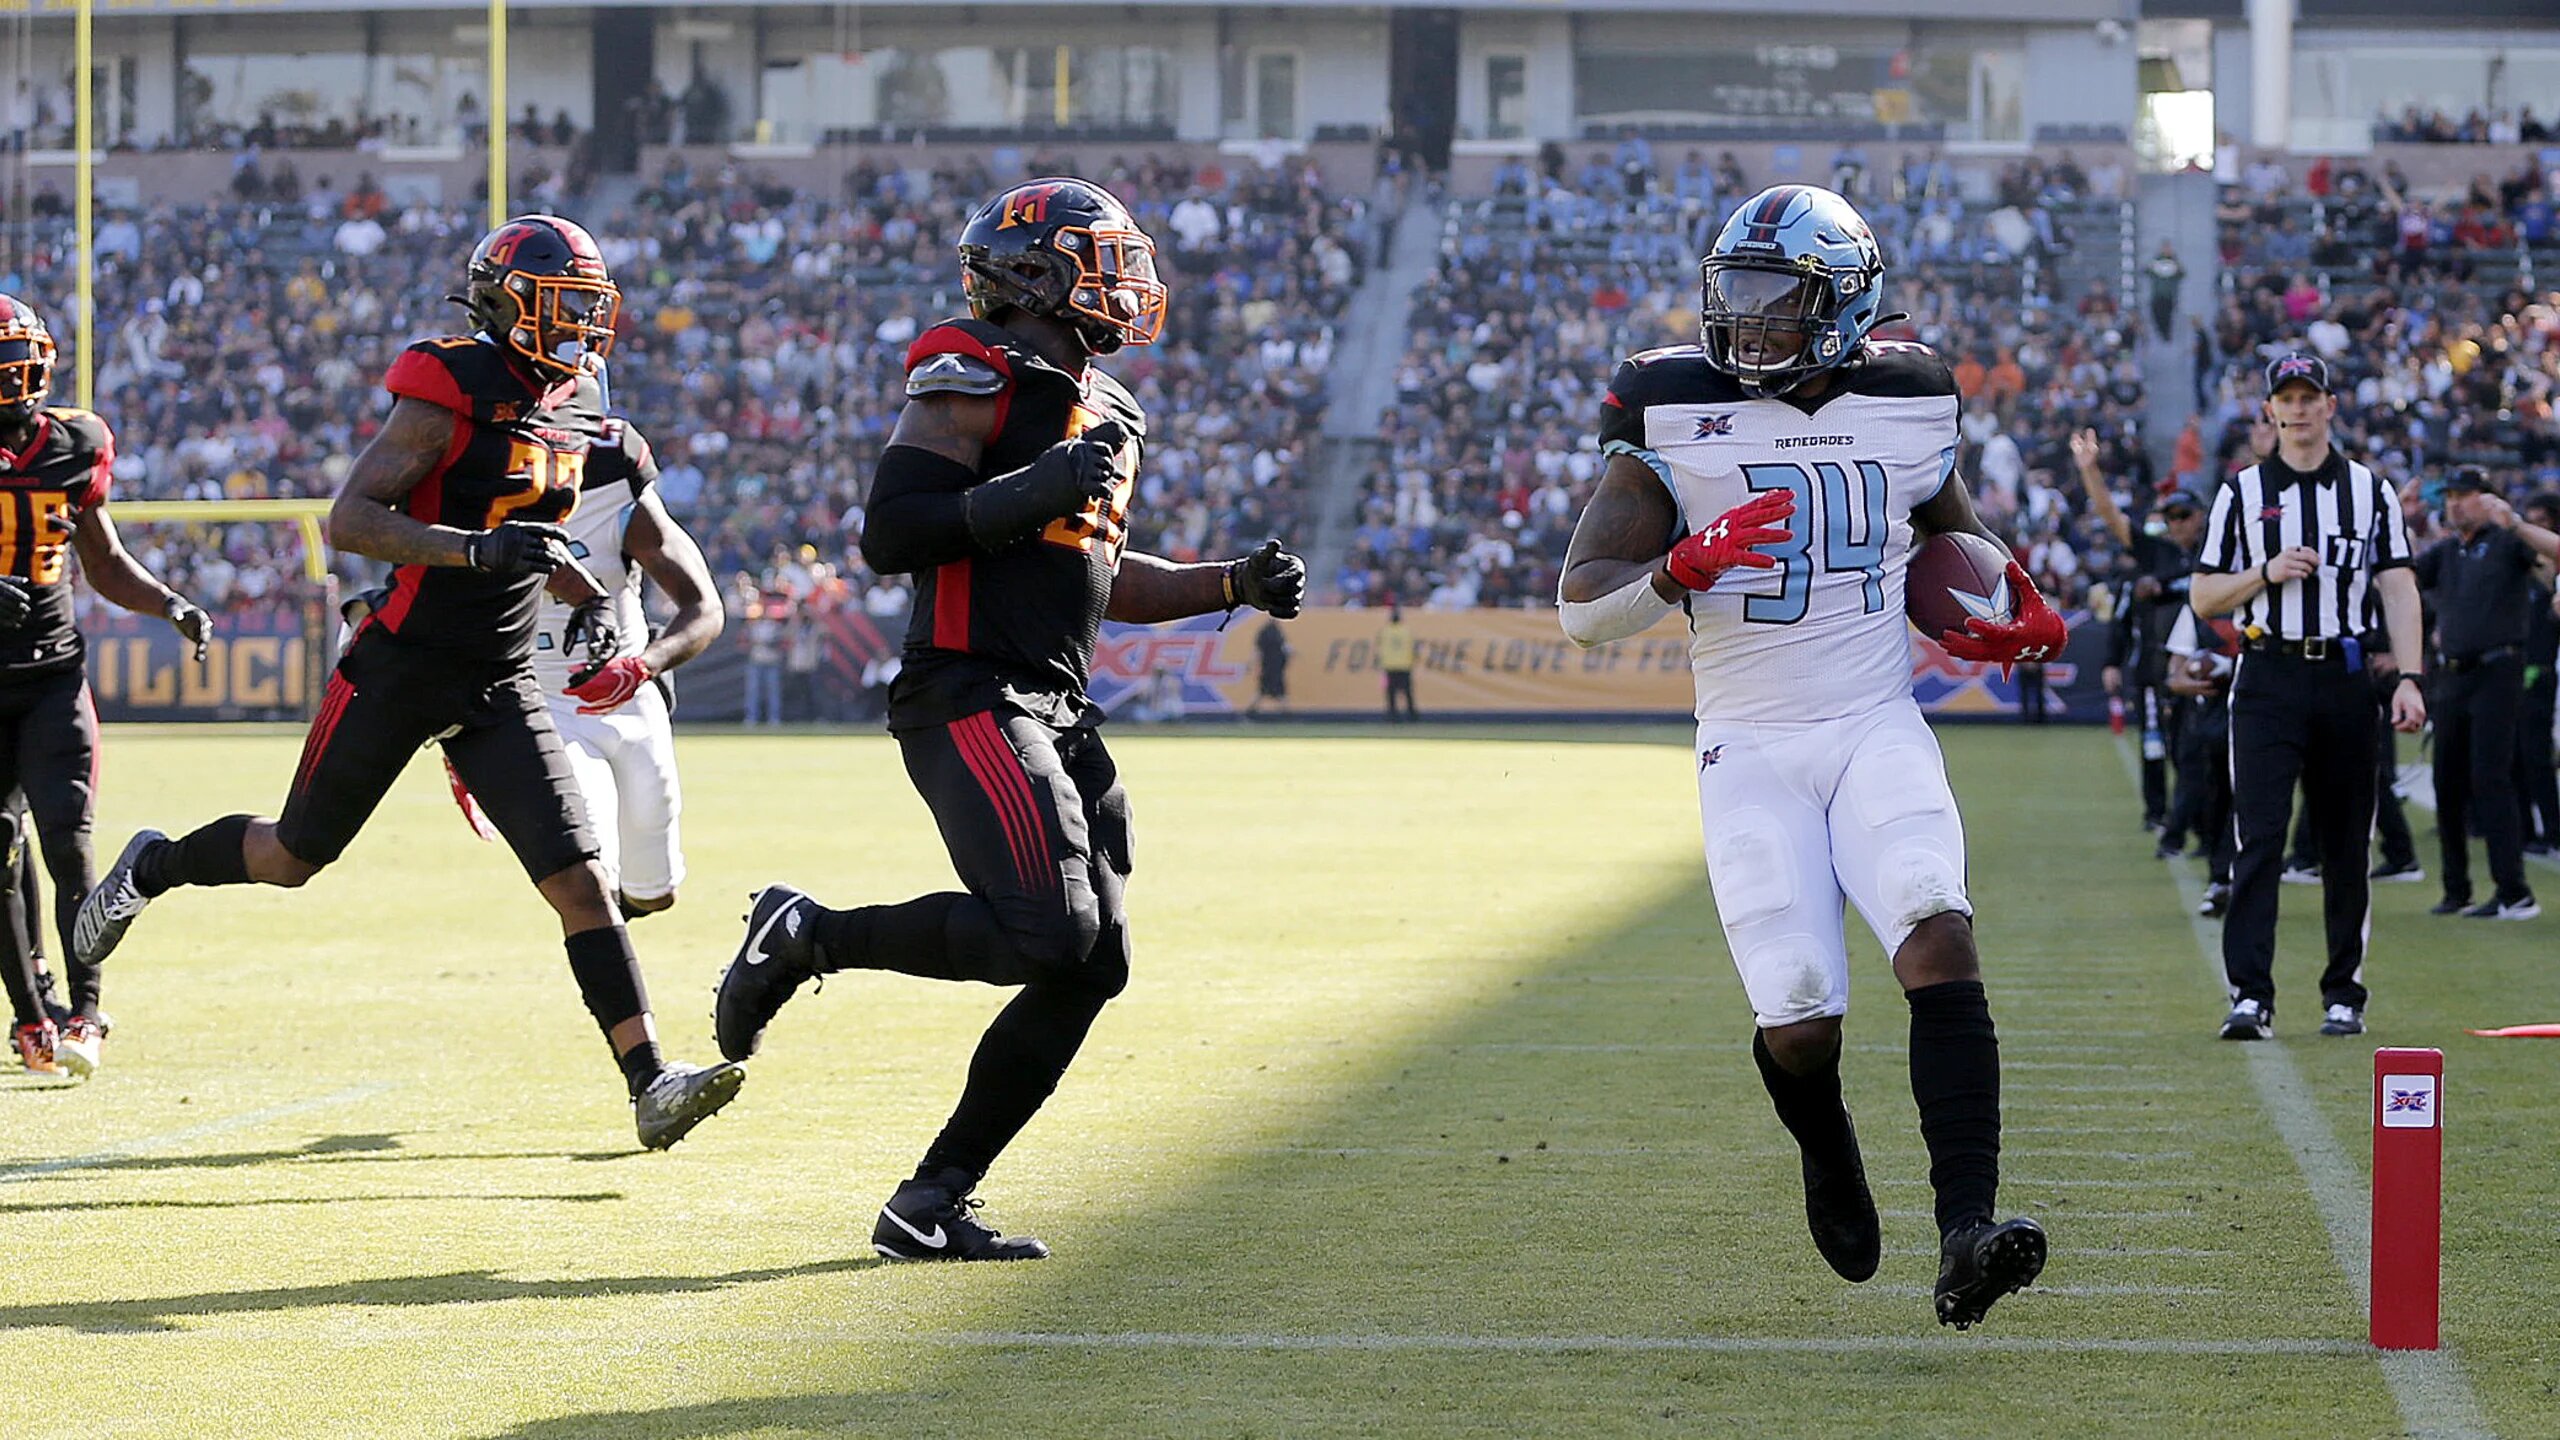 Dallas Renegades running back Cameron Artis-Payne scores a touchdown against the Los Angeles Wildcats